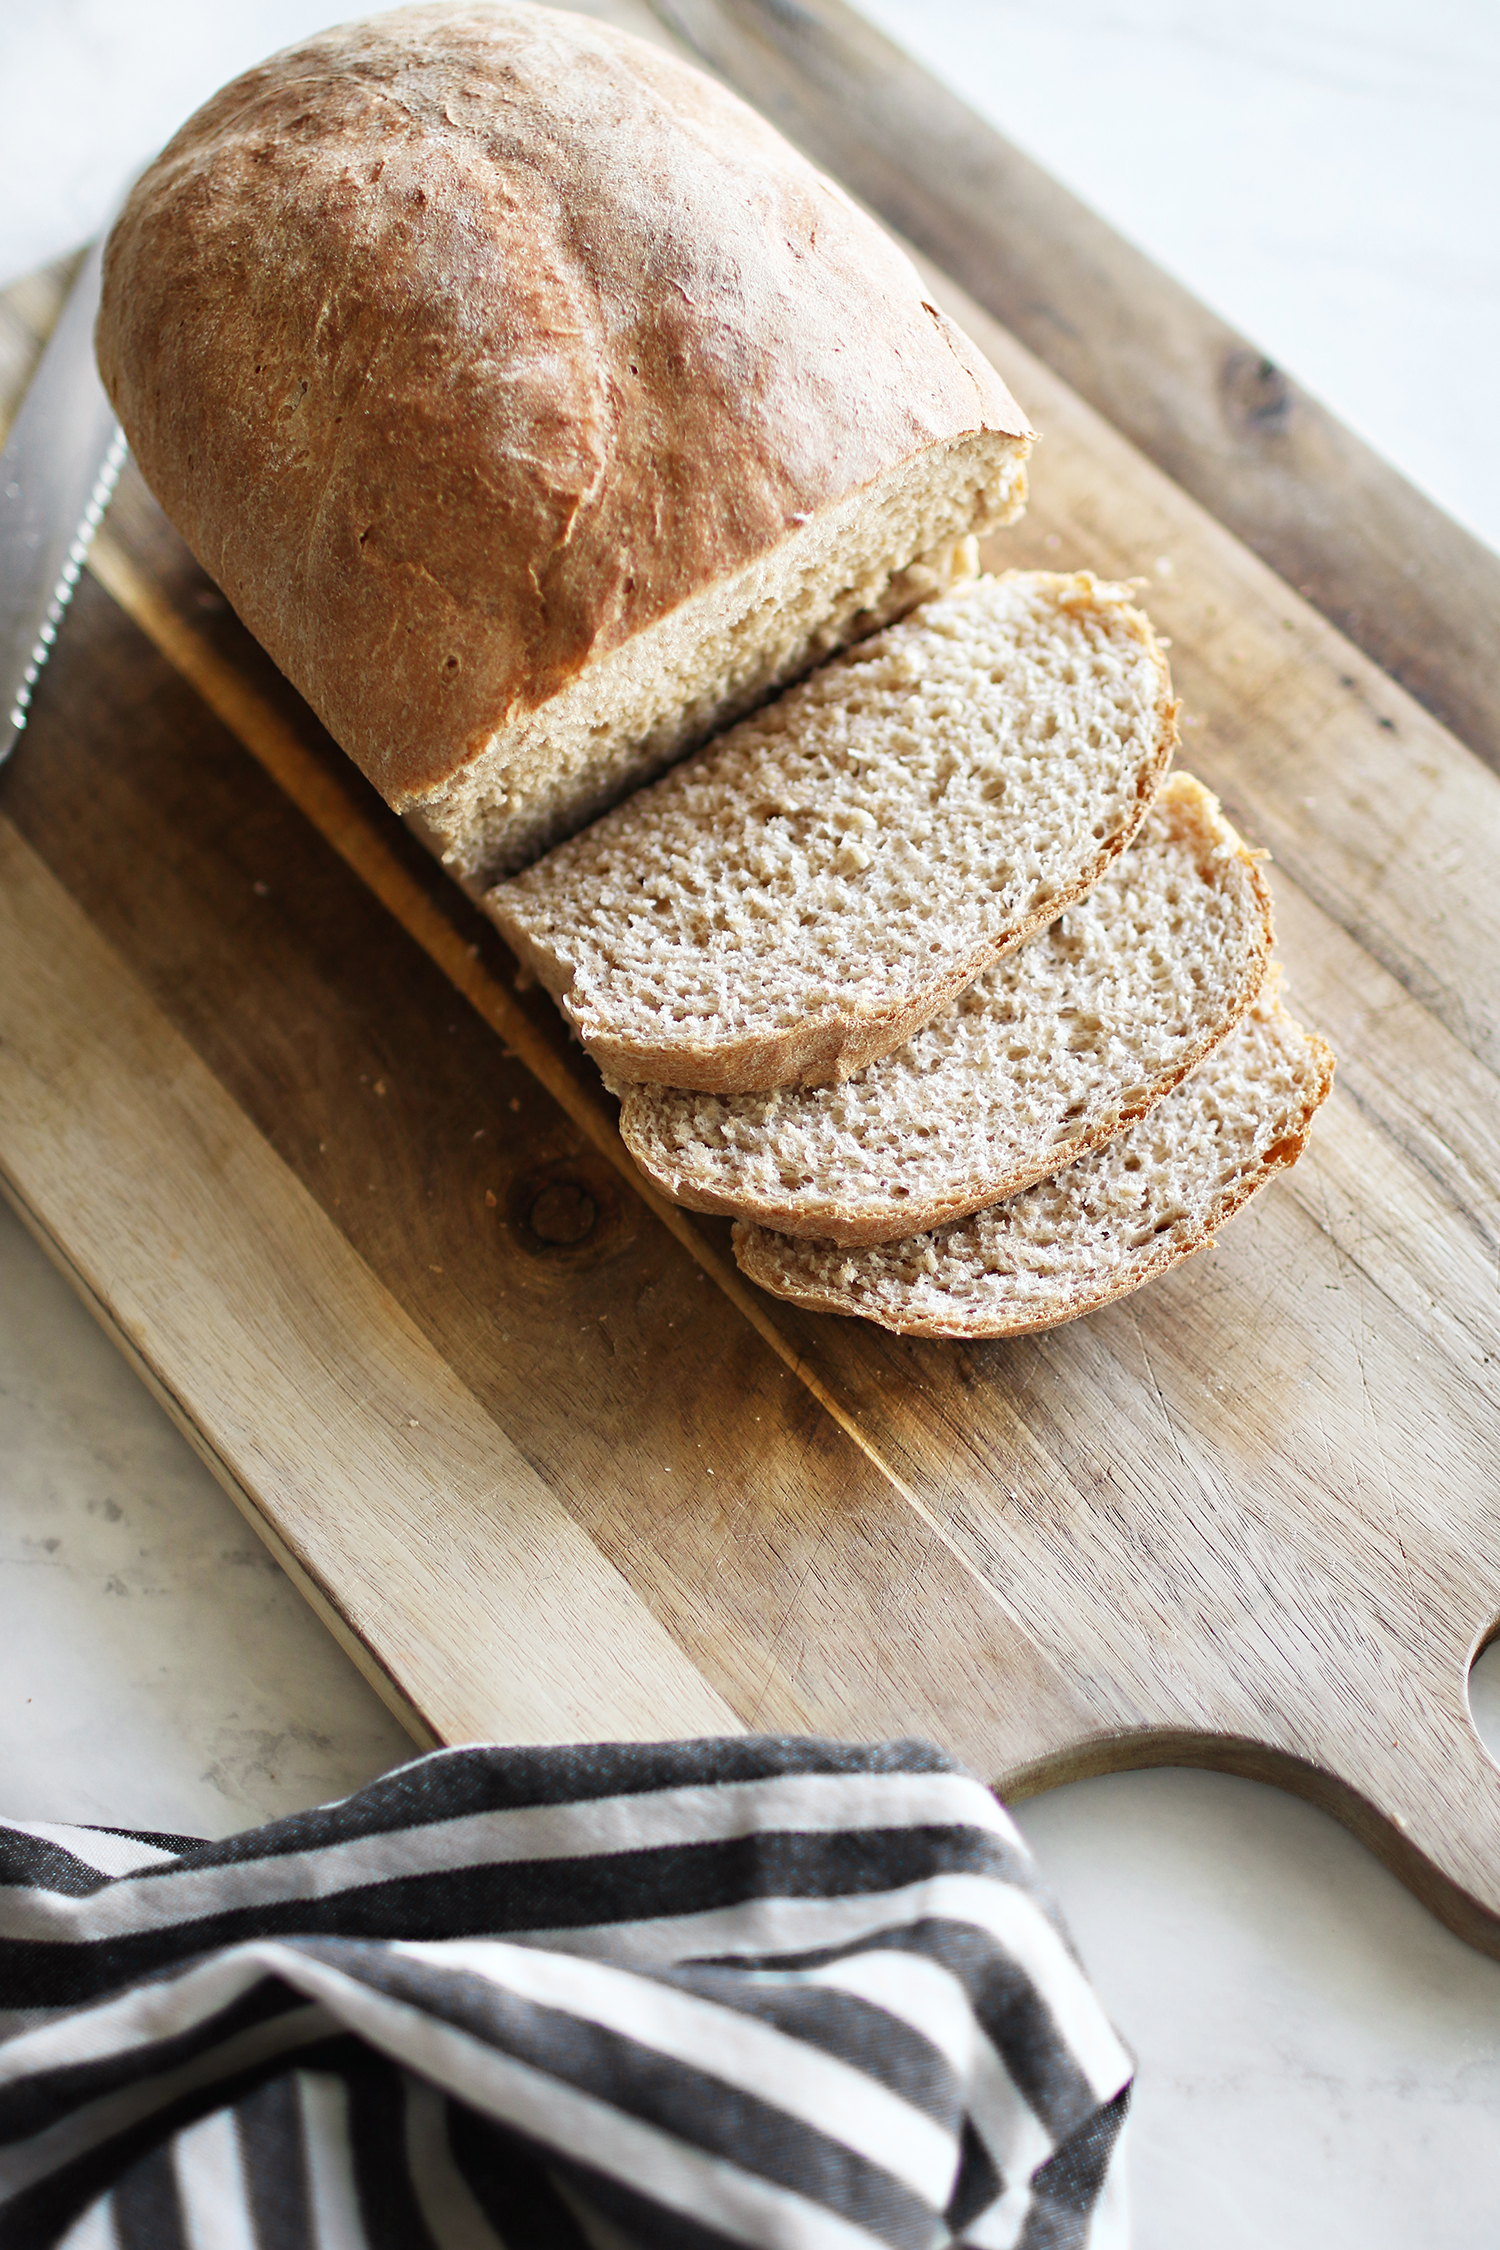 Sharing my recipe for delicious and homemade honey whole wheat bread. Get it now over on KaraLayne.com! #HomemadeBread #EasyHomemadeBread #HomemadeBreadRecipe #HoneyWholeWheatBread #HowToMakeHomemadeBread #Recipe #Baking